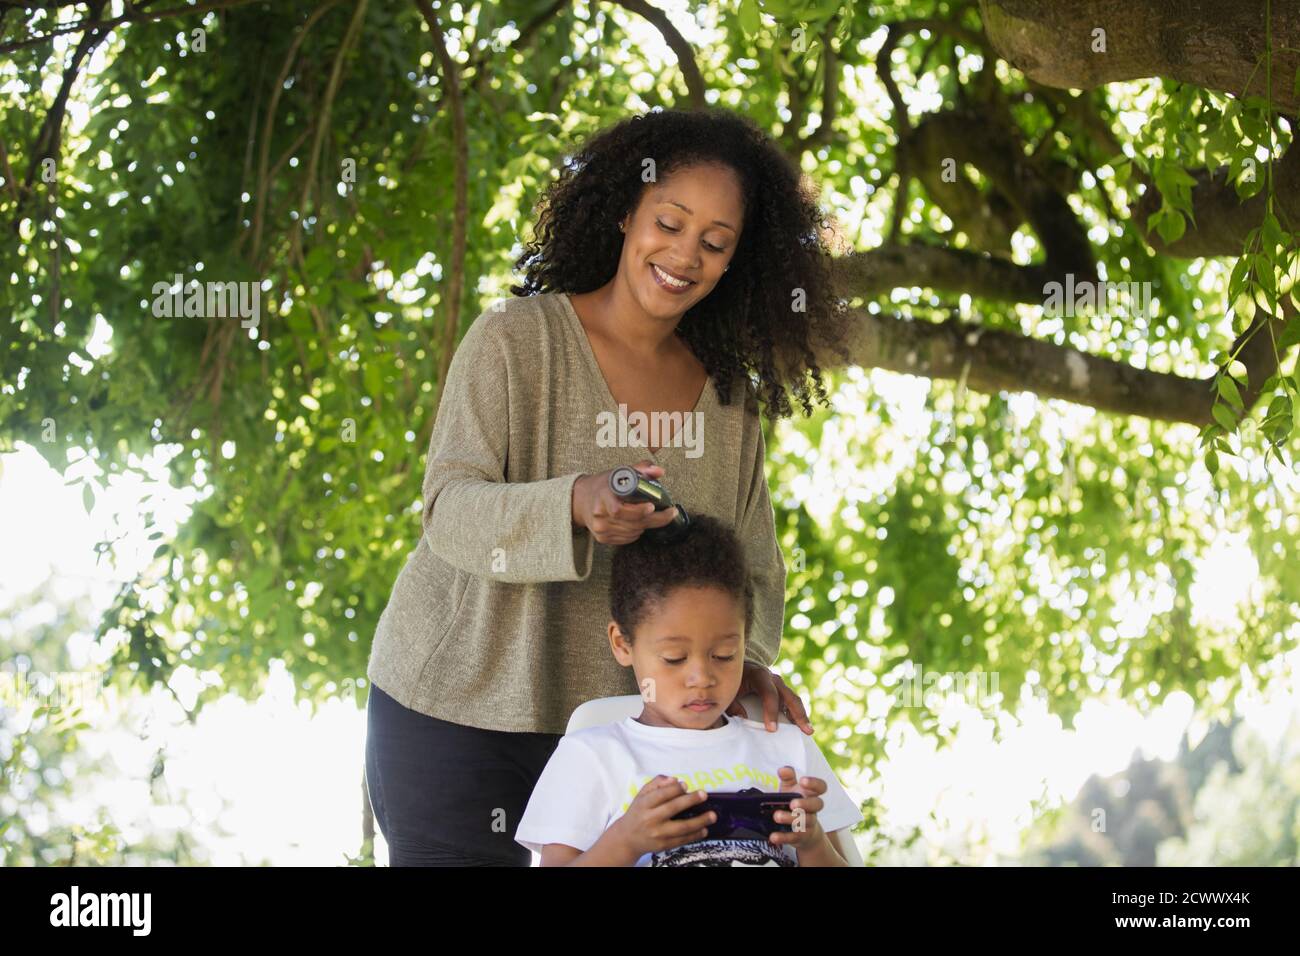 Mother trimming hair of son under tree in summer backyard Stock Photo